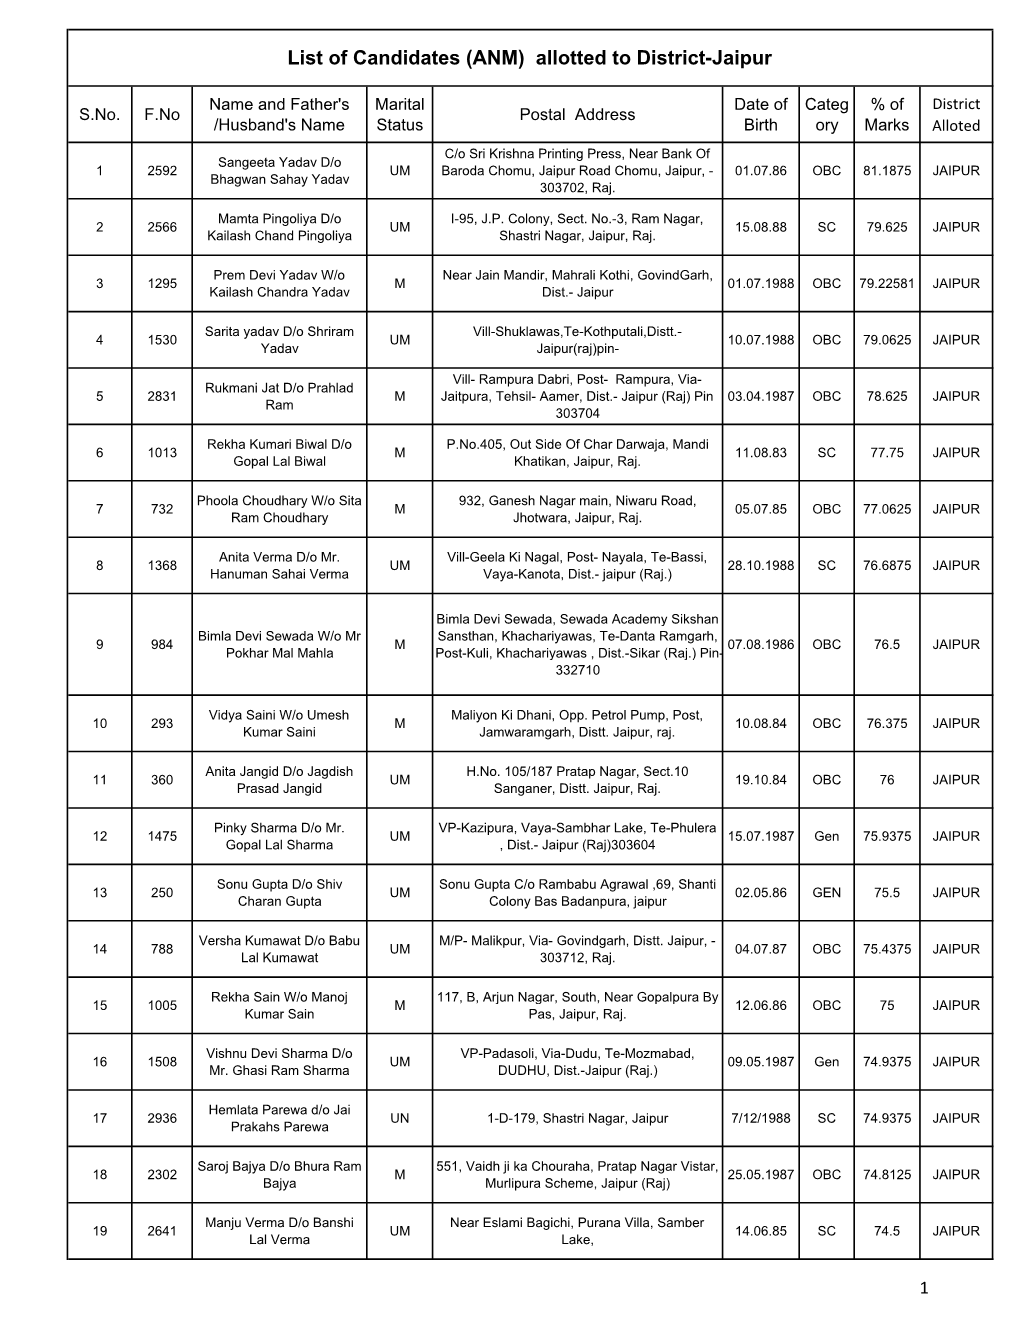 List of Candidates (ANM) Allotted to District-Jaipur